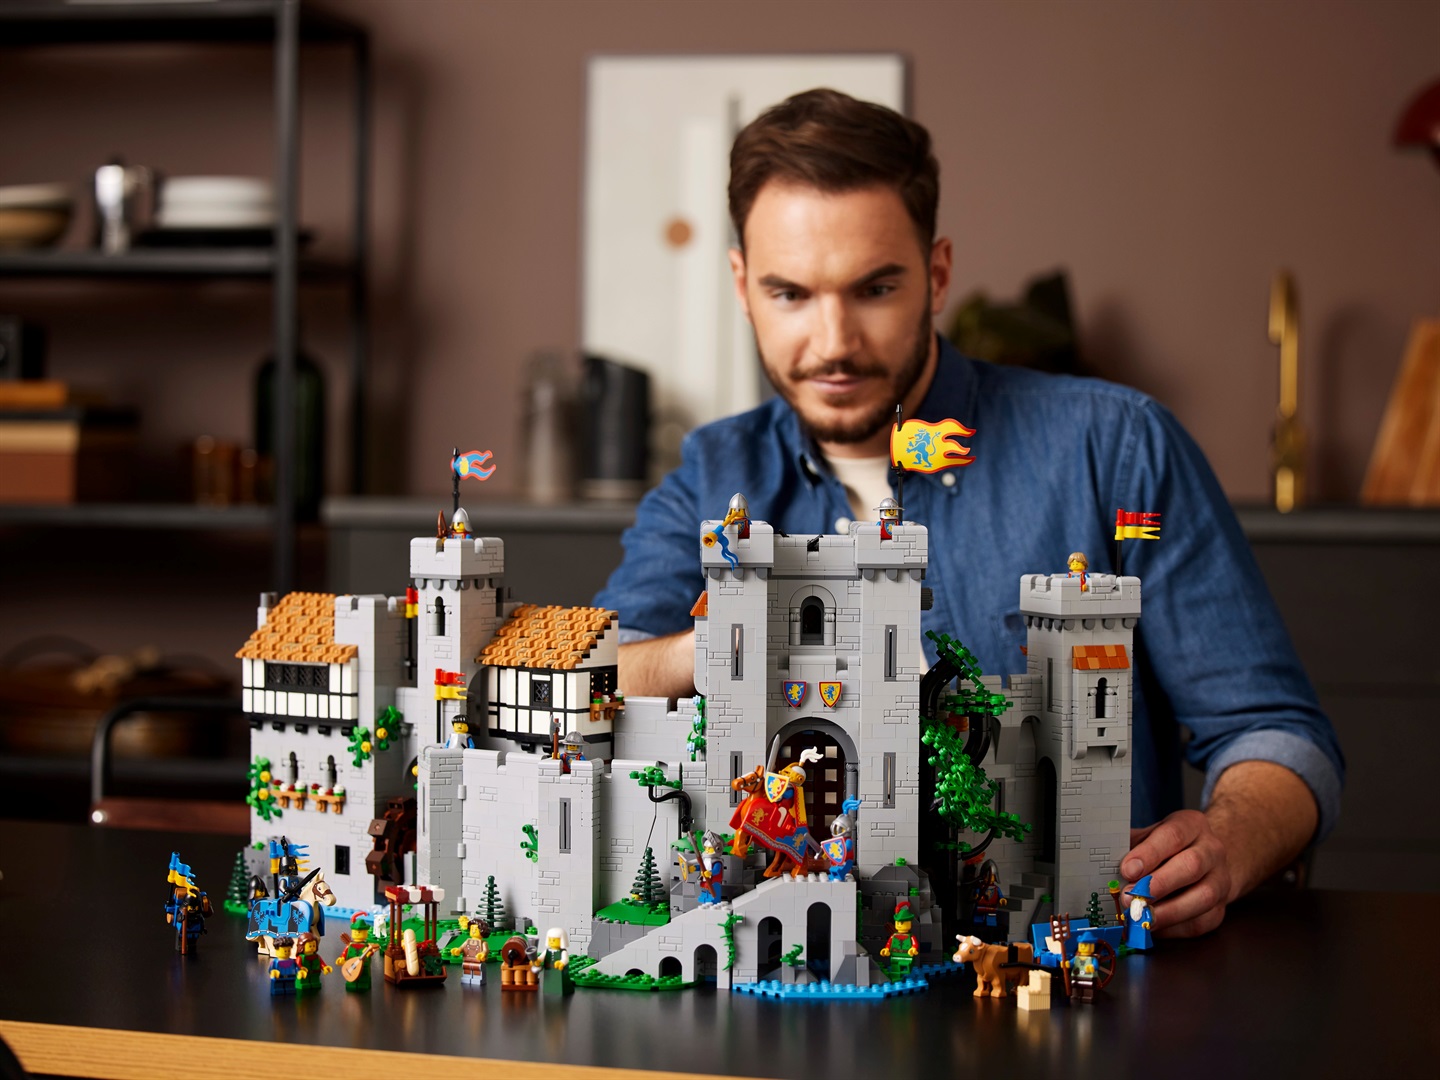 Lego Lions Knights' Castle will cost $399 and go on sale in August.